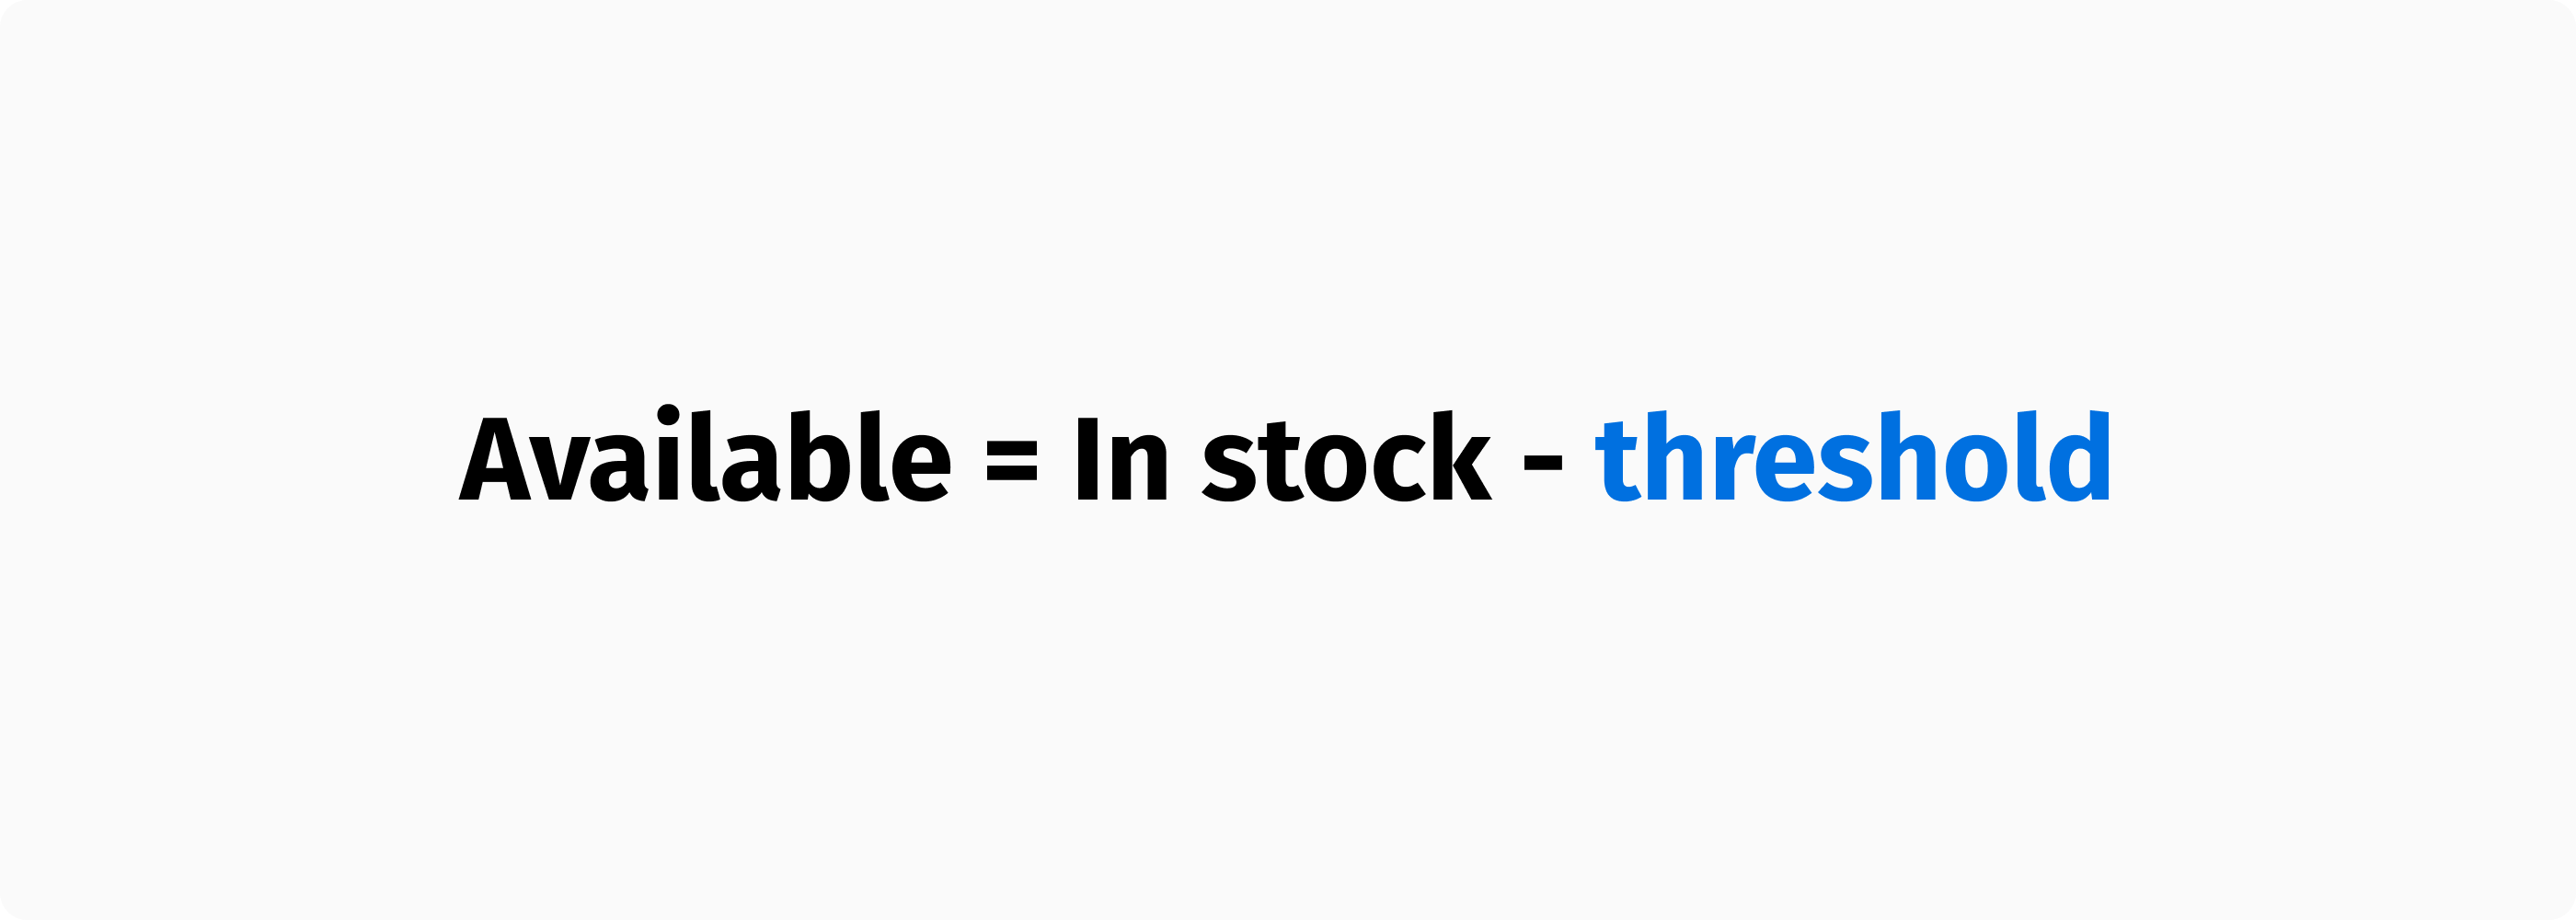 Stock availability is reduced by inventory thresholds.